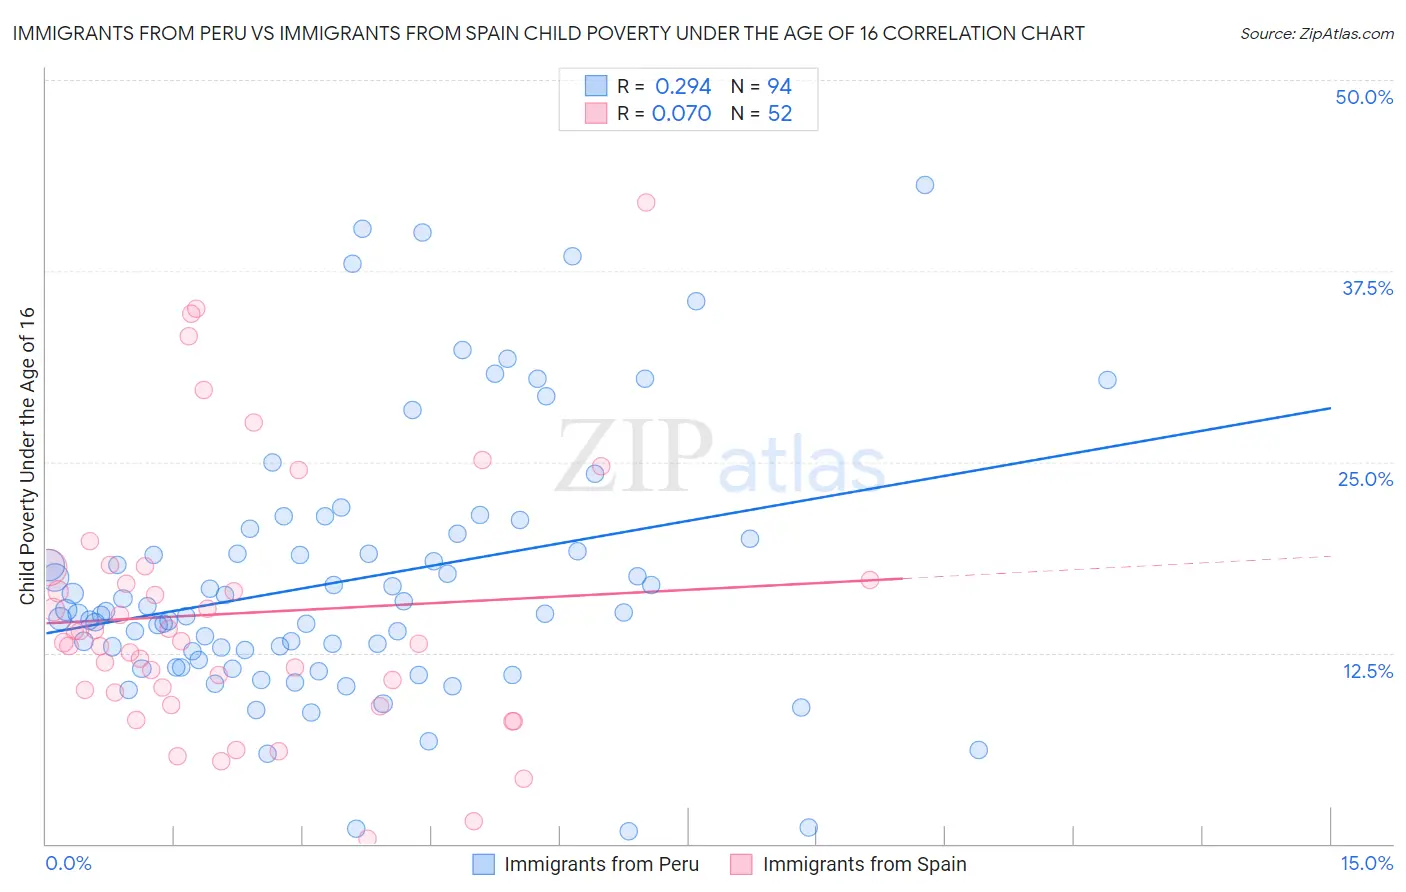 Immigrants from Peru vs Immigrants from Spain Child Poverty Under the Age of 16